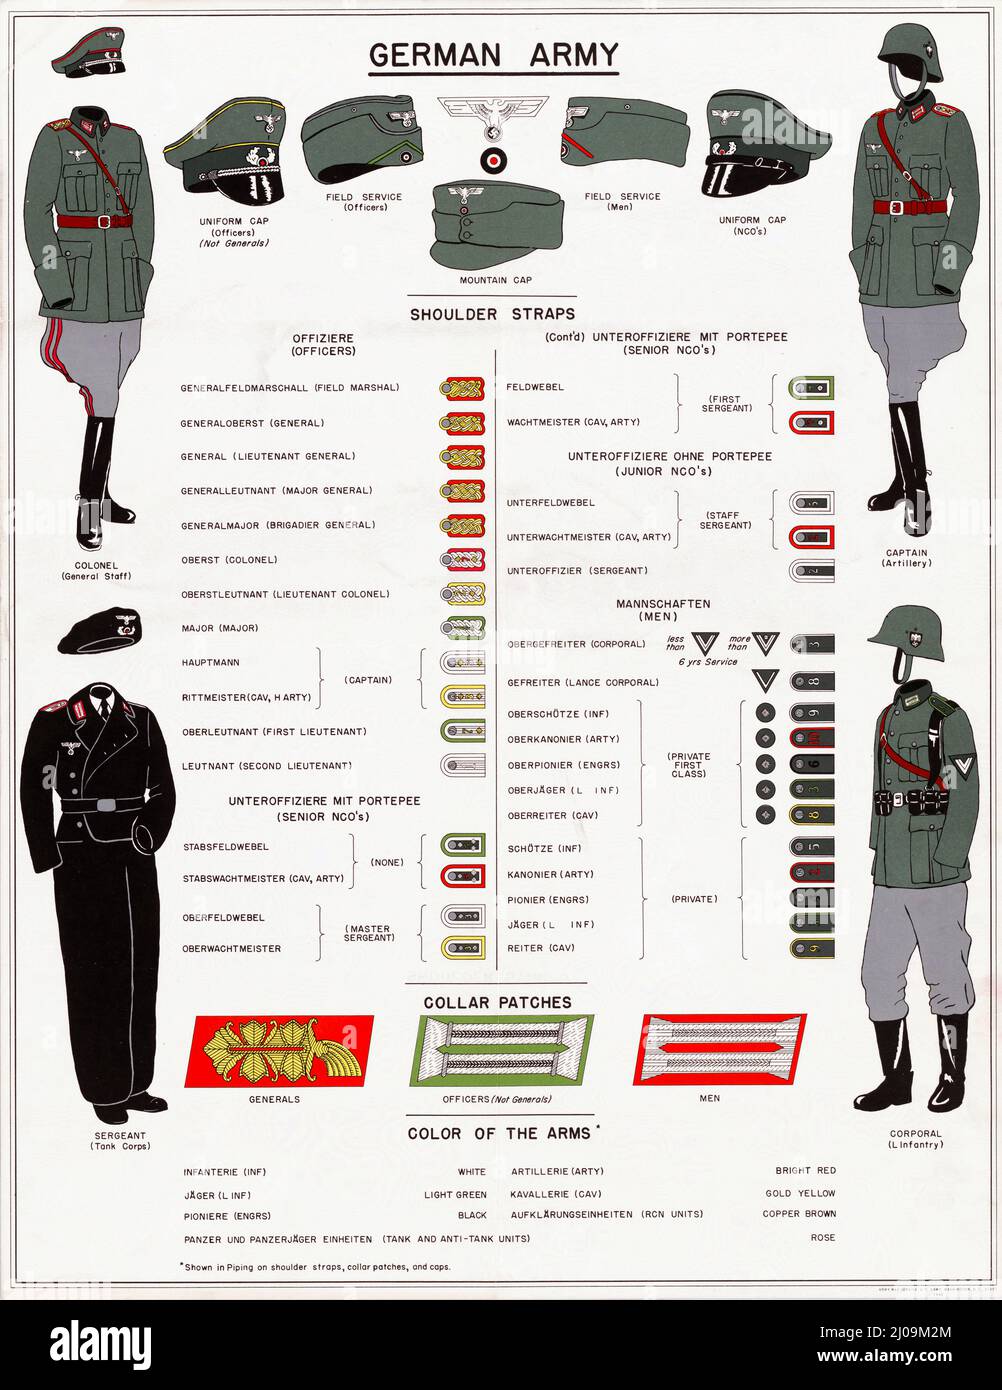 WWII German Army Uniforms, Caps, Shoulder straps, Collar patches, Rank insignia, Poster Chart - US Army 1942 Stock Photo